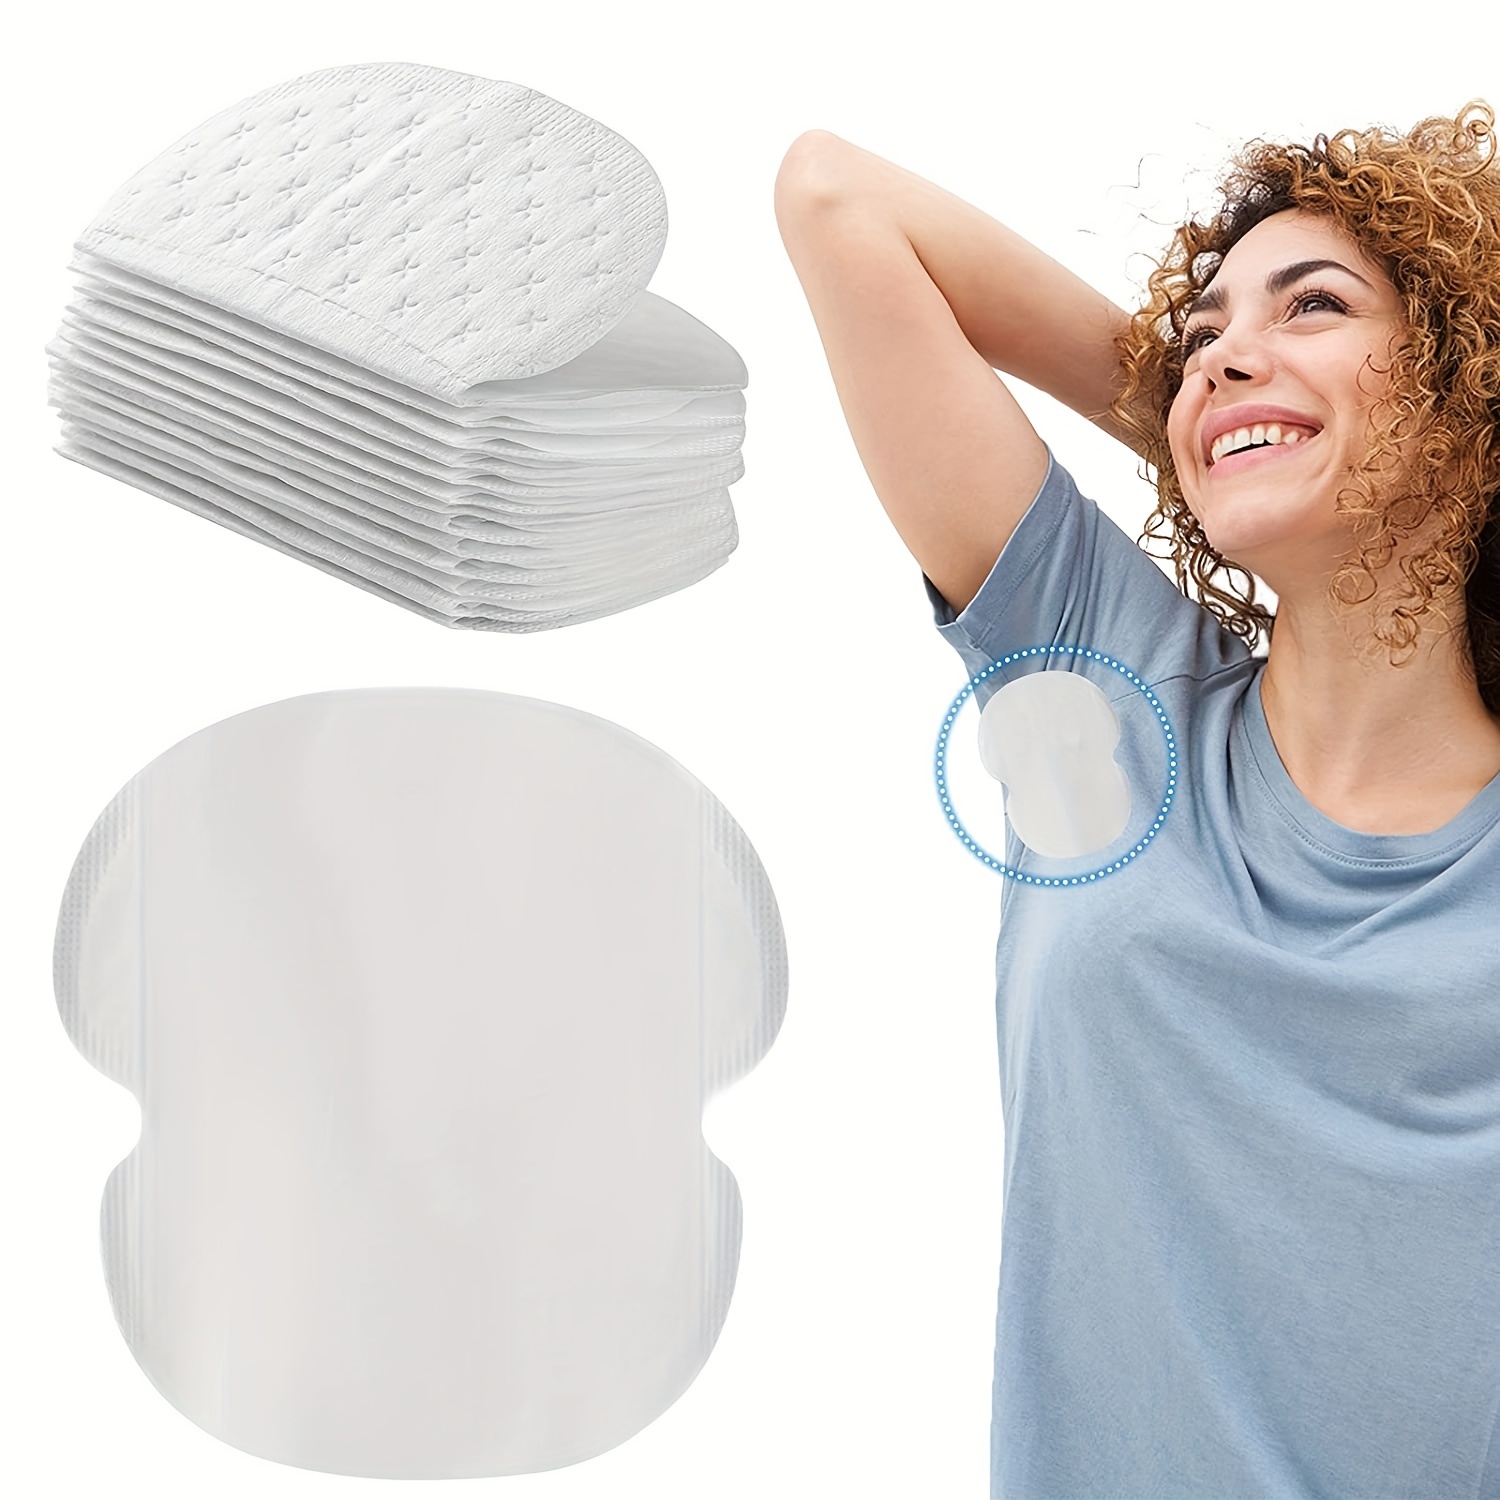 Underarm Sweat Pads For Men and Women Comfortable, Non Visible